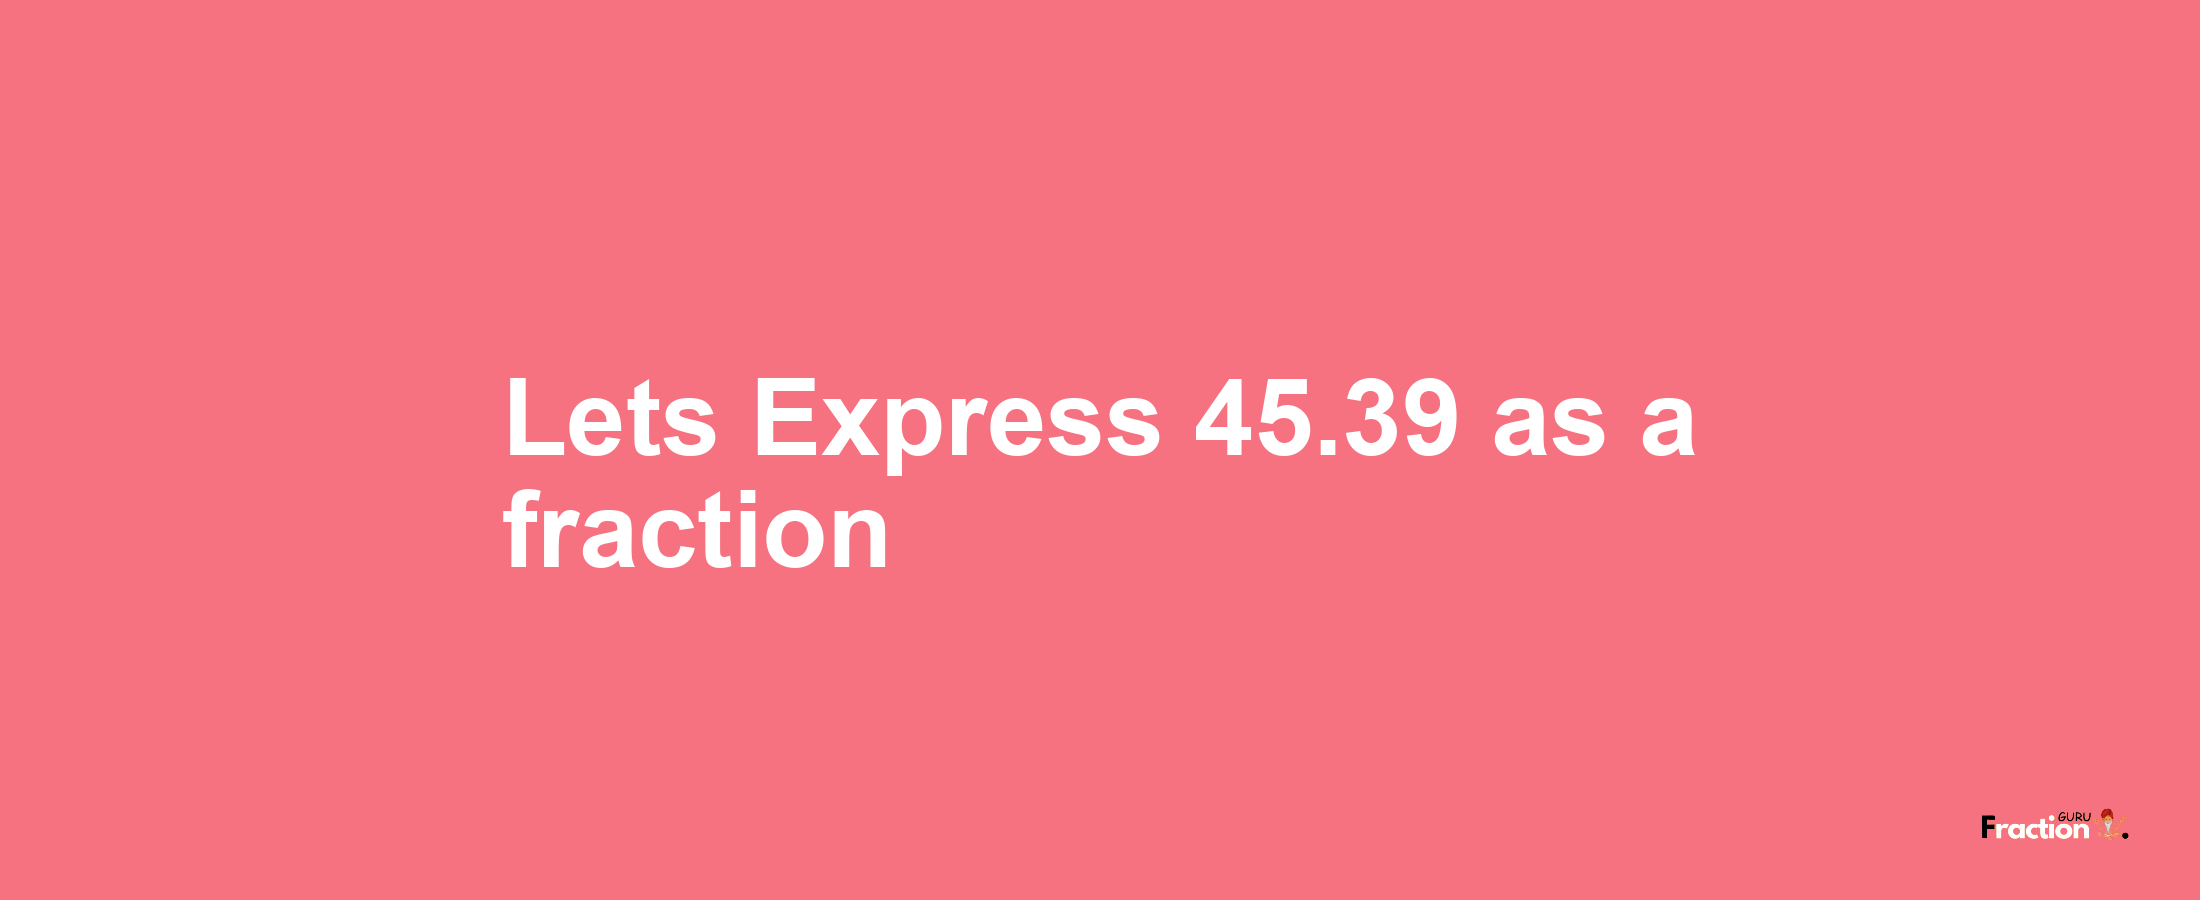 Lets Express 45.39 as afraction